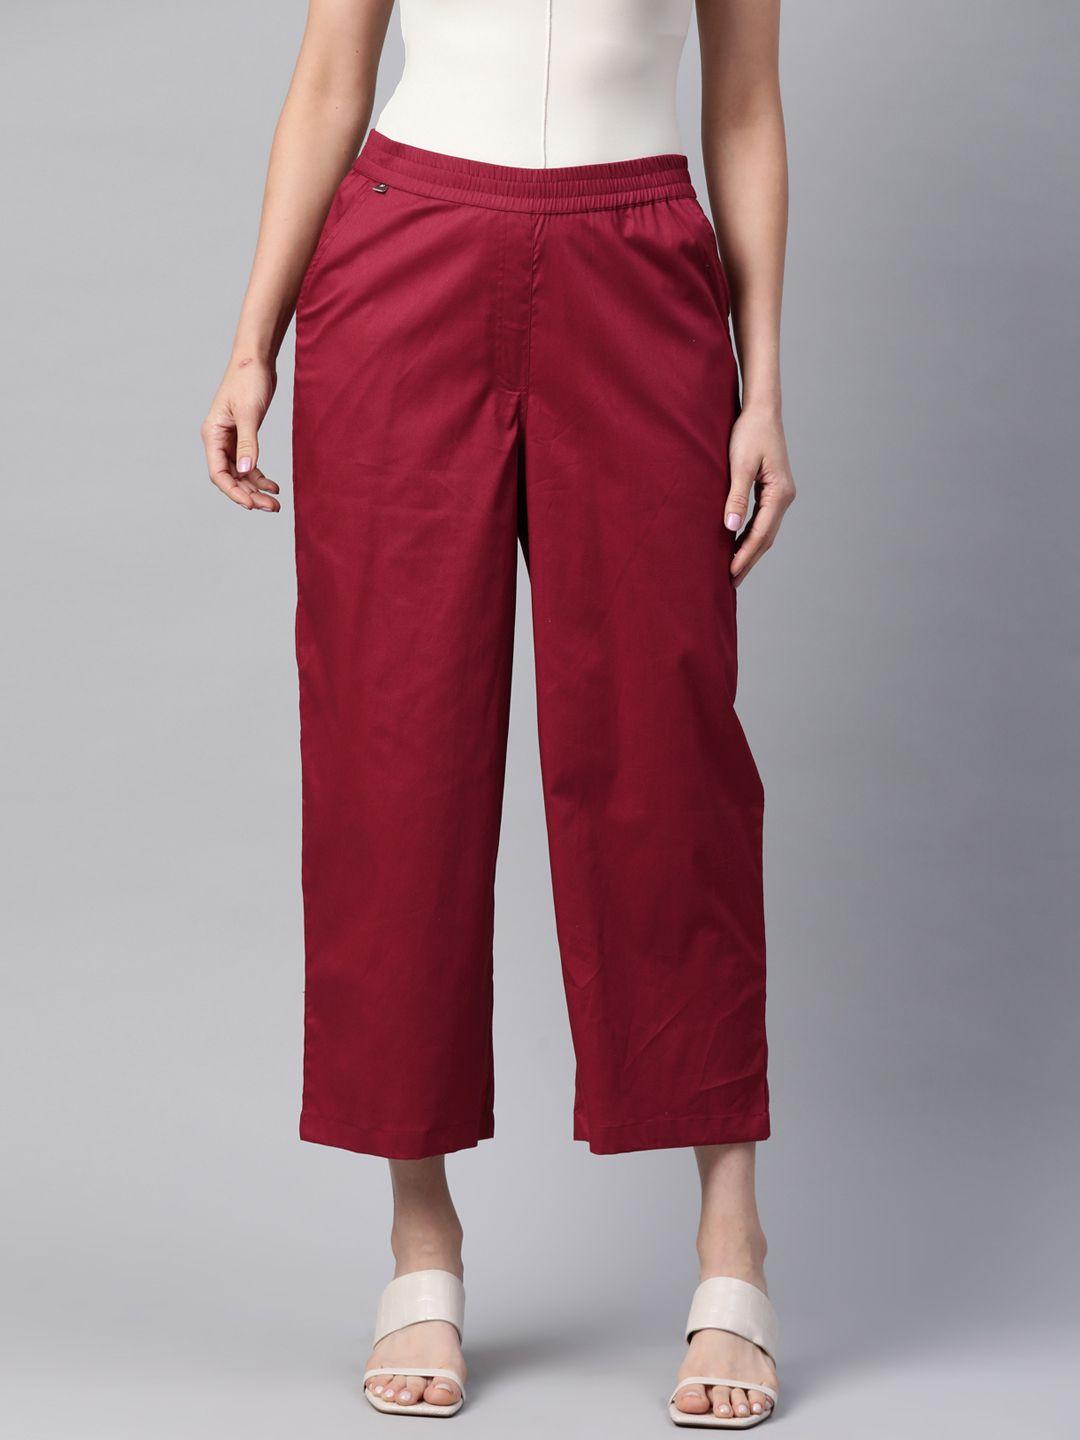 readiprint fashions straight fit high-rise culottes trousers